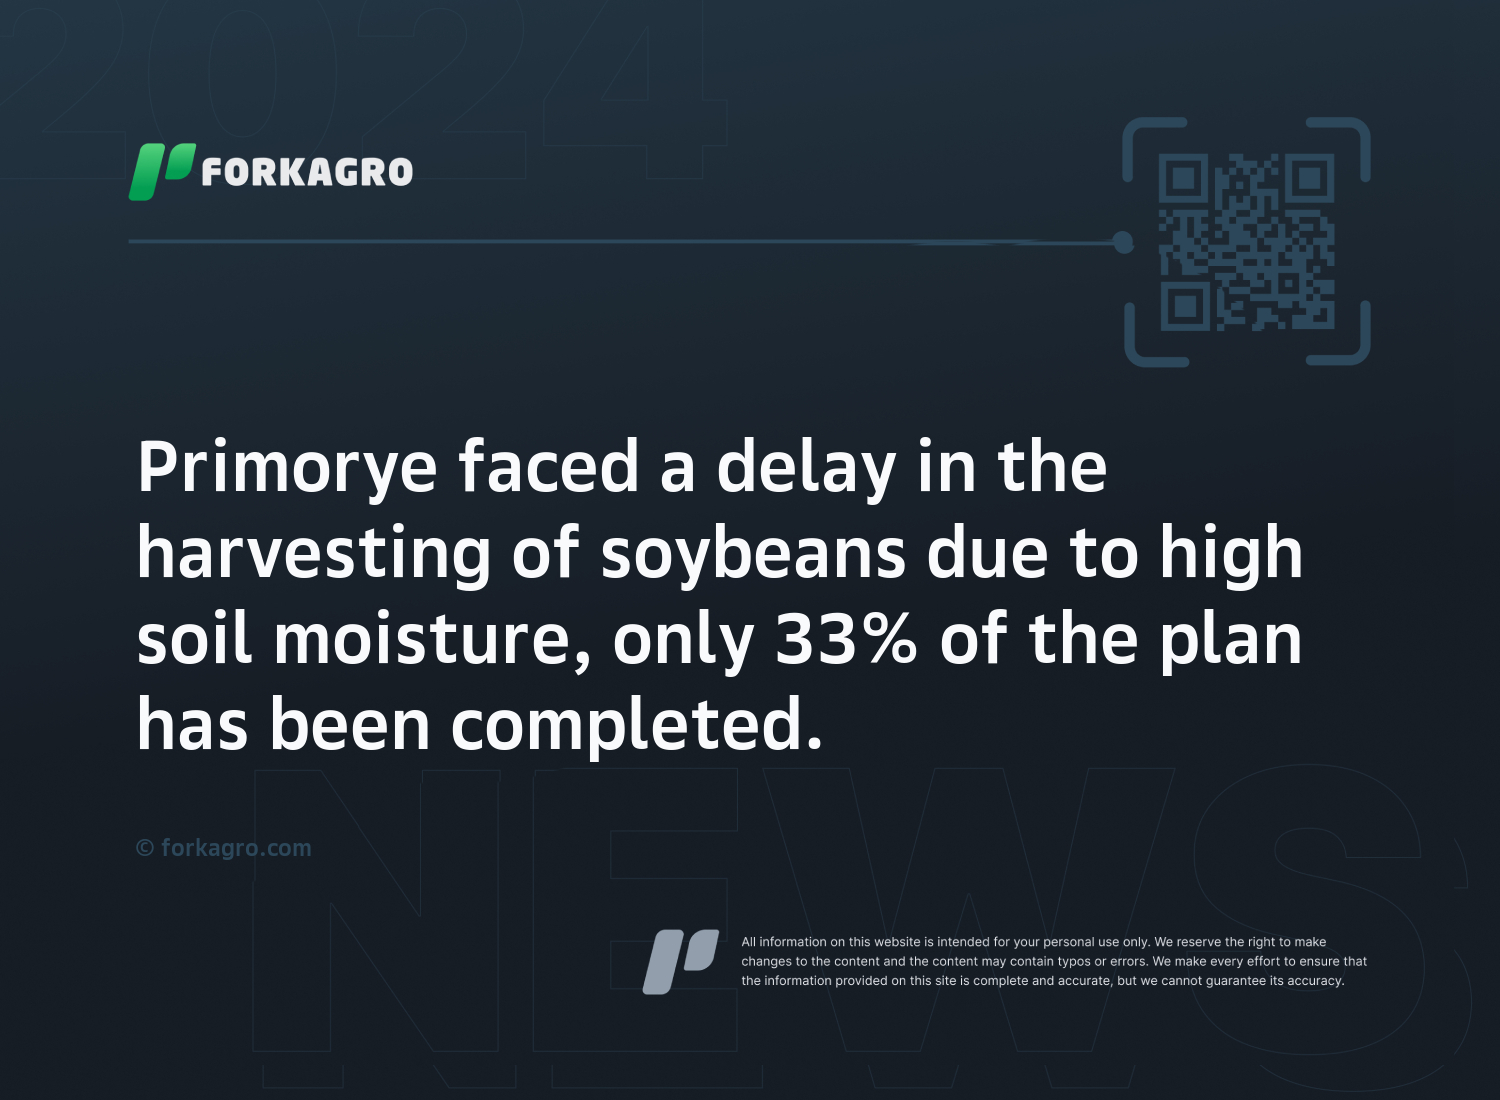 Primorye faced a delay in the harvesting of soybeans due to high soil moisture, only 33% of the plan has been completed.